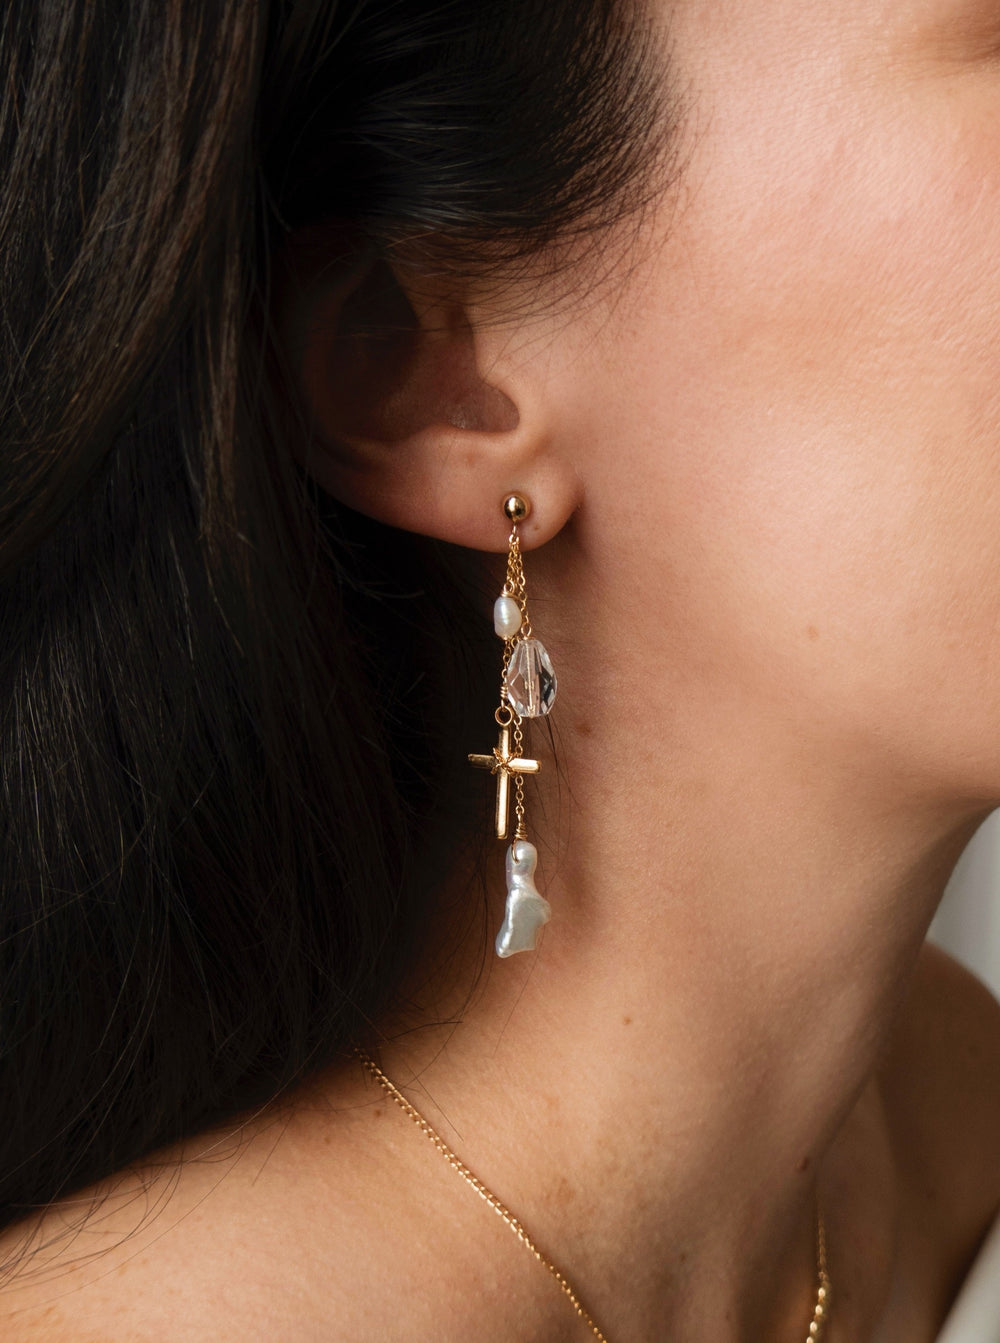 Iconic Pillars earrings in gold with purple glass – Adorn Jewelry and  Accessories